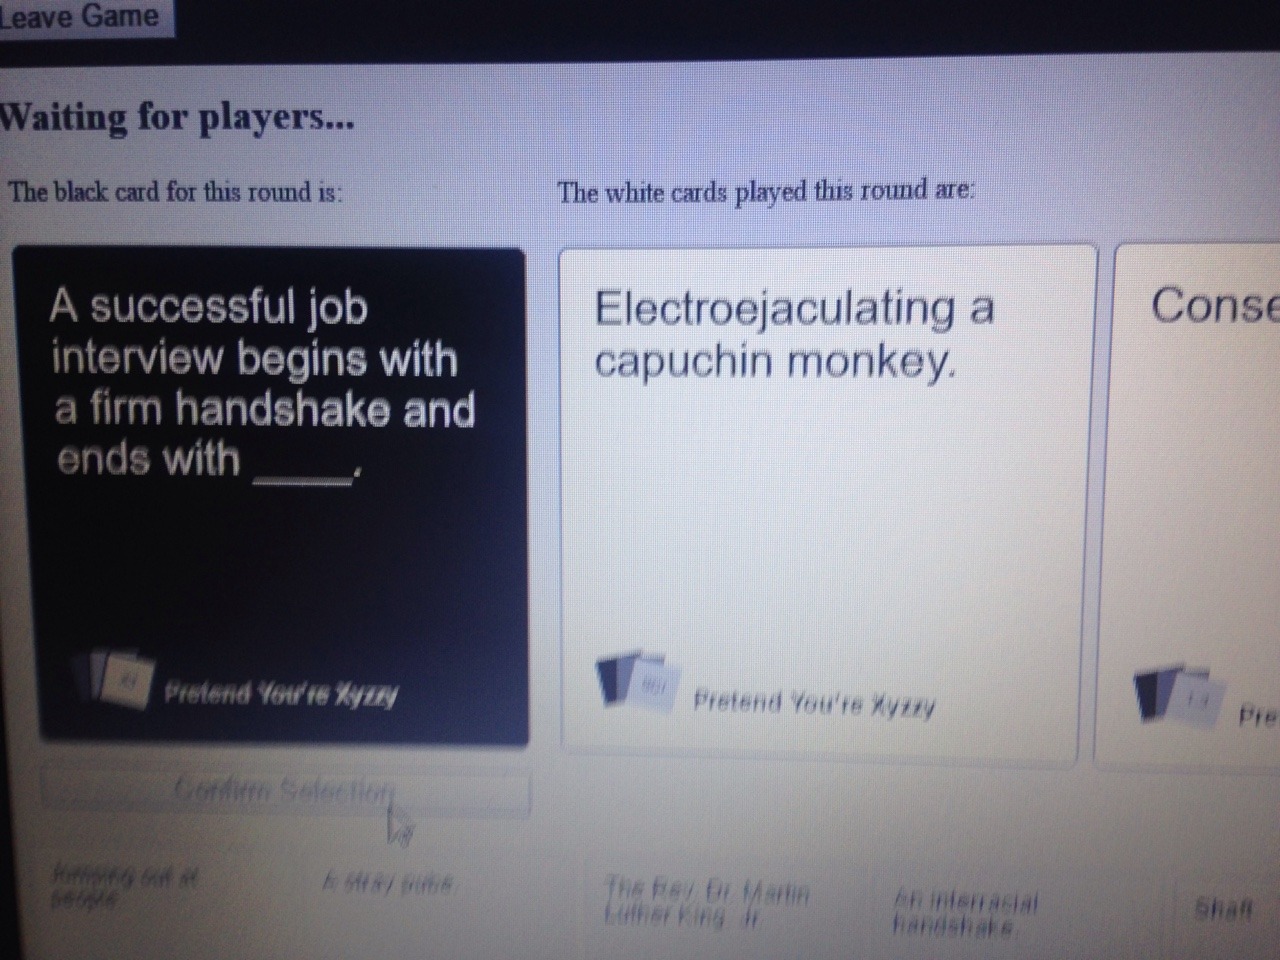 Had a lovely 5+ hour game of cards against humanity with my best friend James and